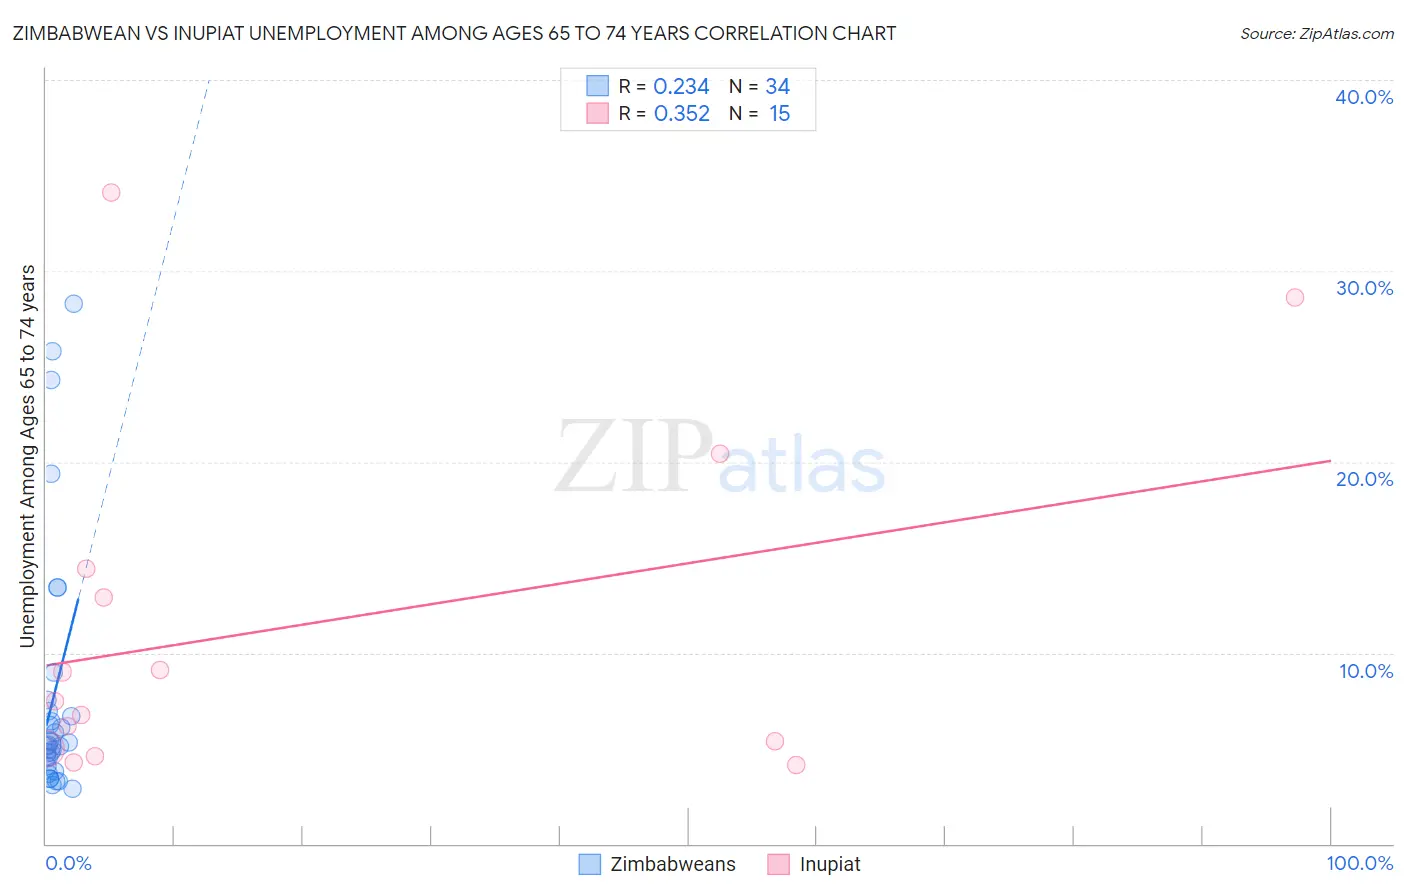 Zimbabwean vs Inupiat Unemployment Among Ages 65 to 74 years